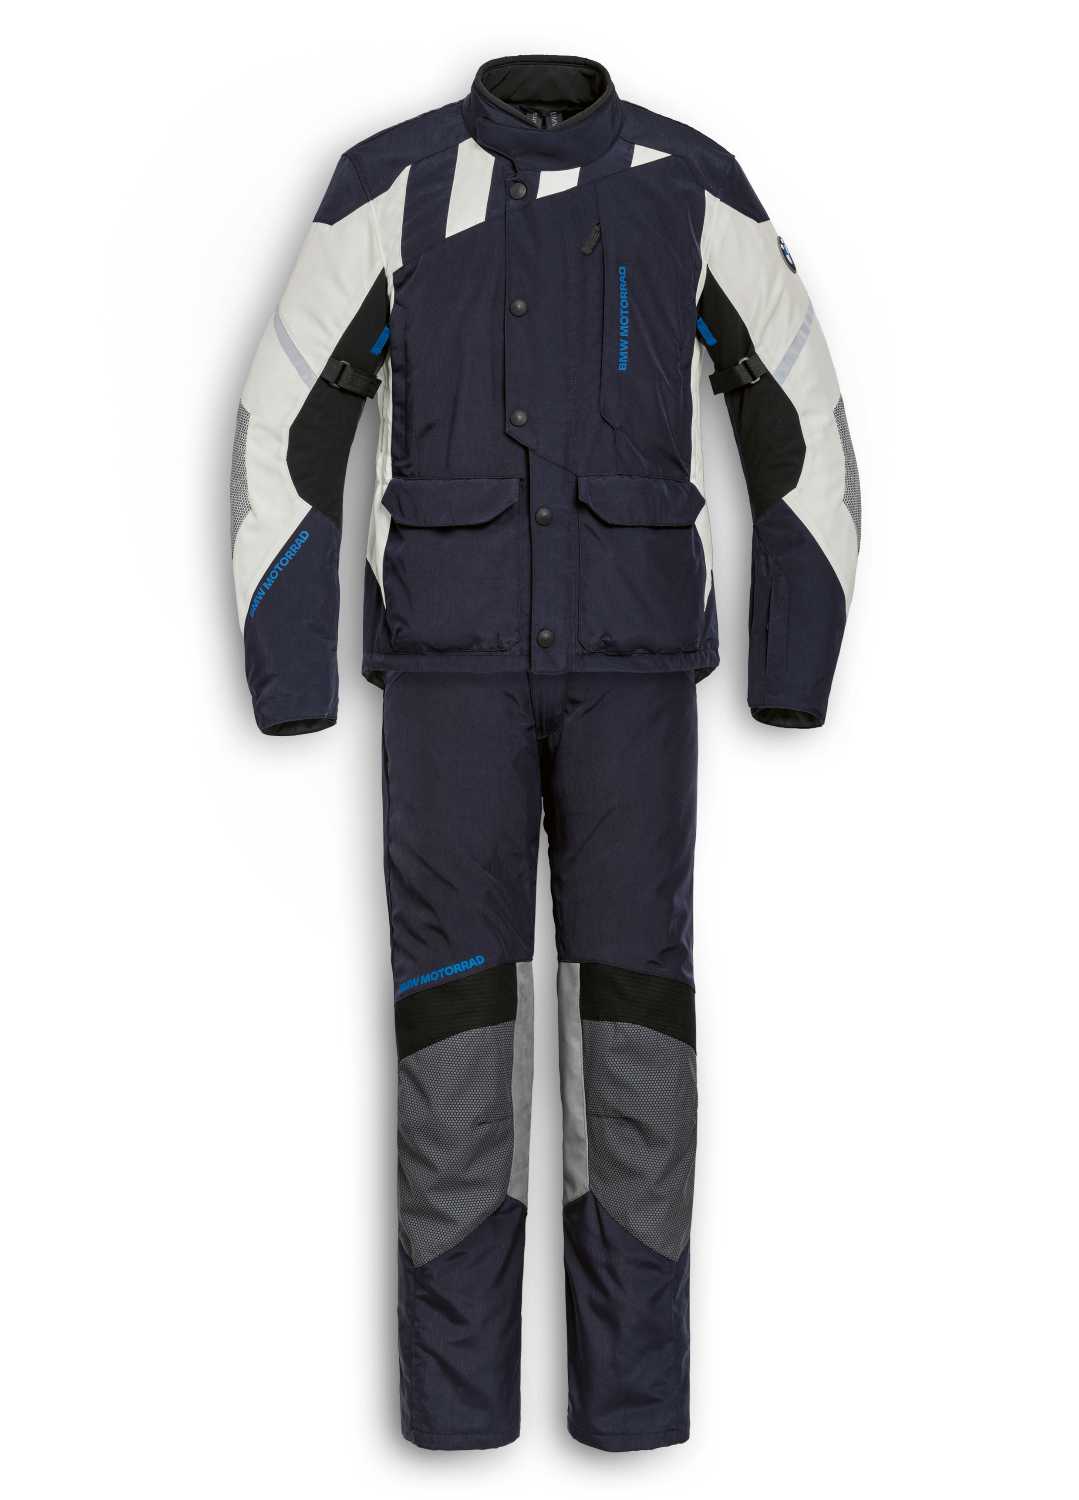 BMW Motorrad Puts Out New EnduroGuard Suit In The U.S. - autoevolution